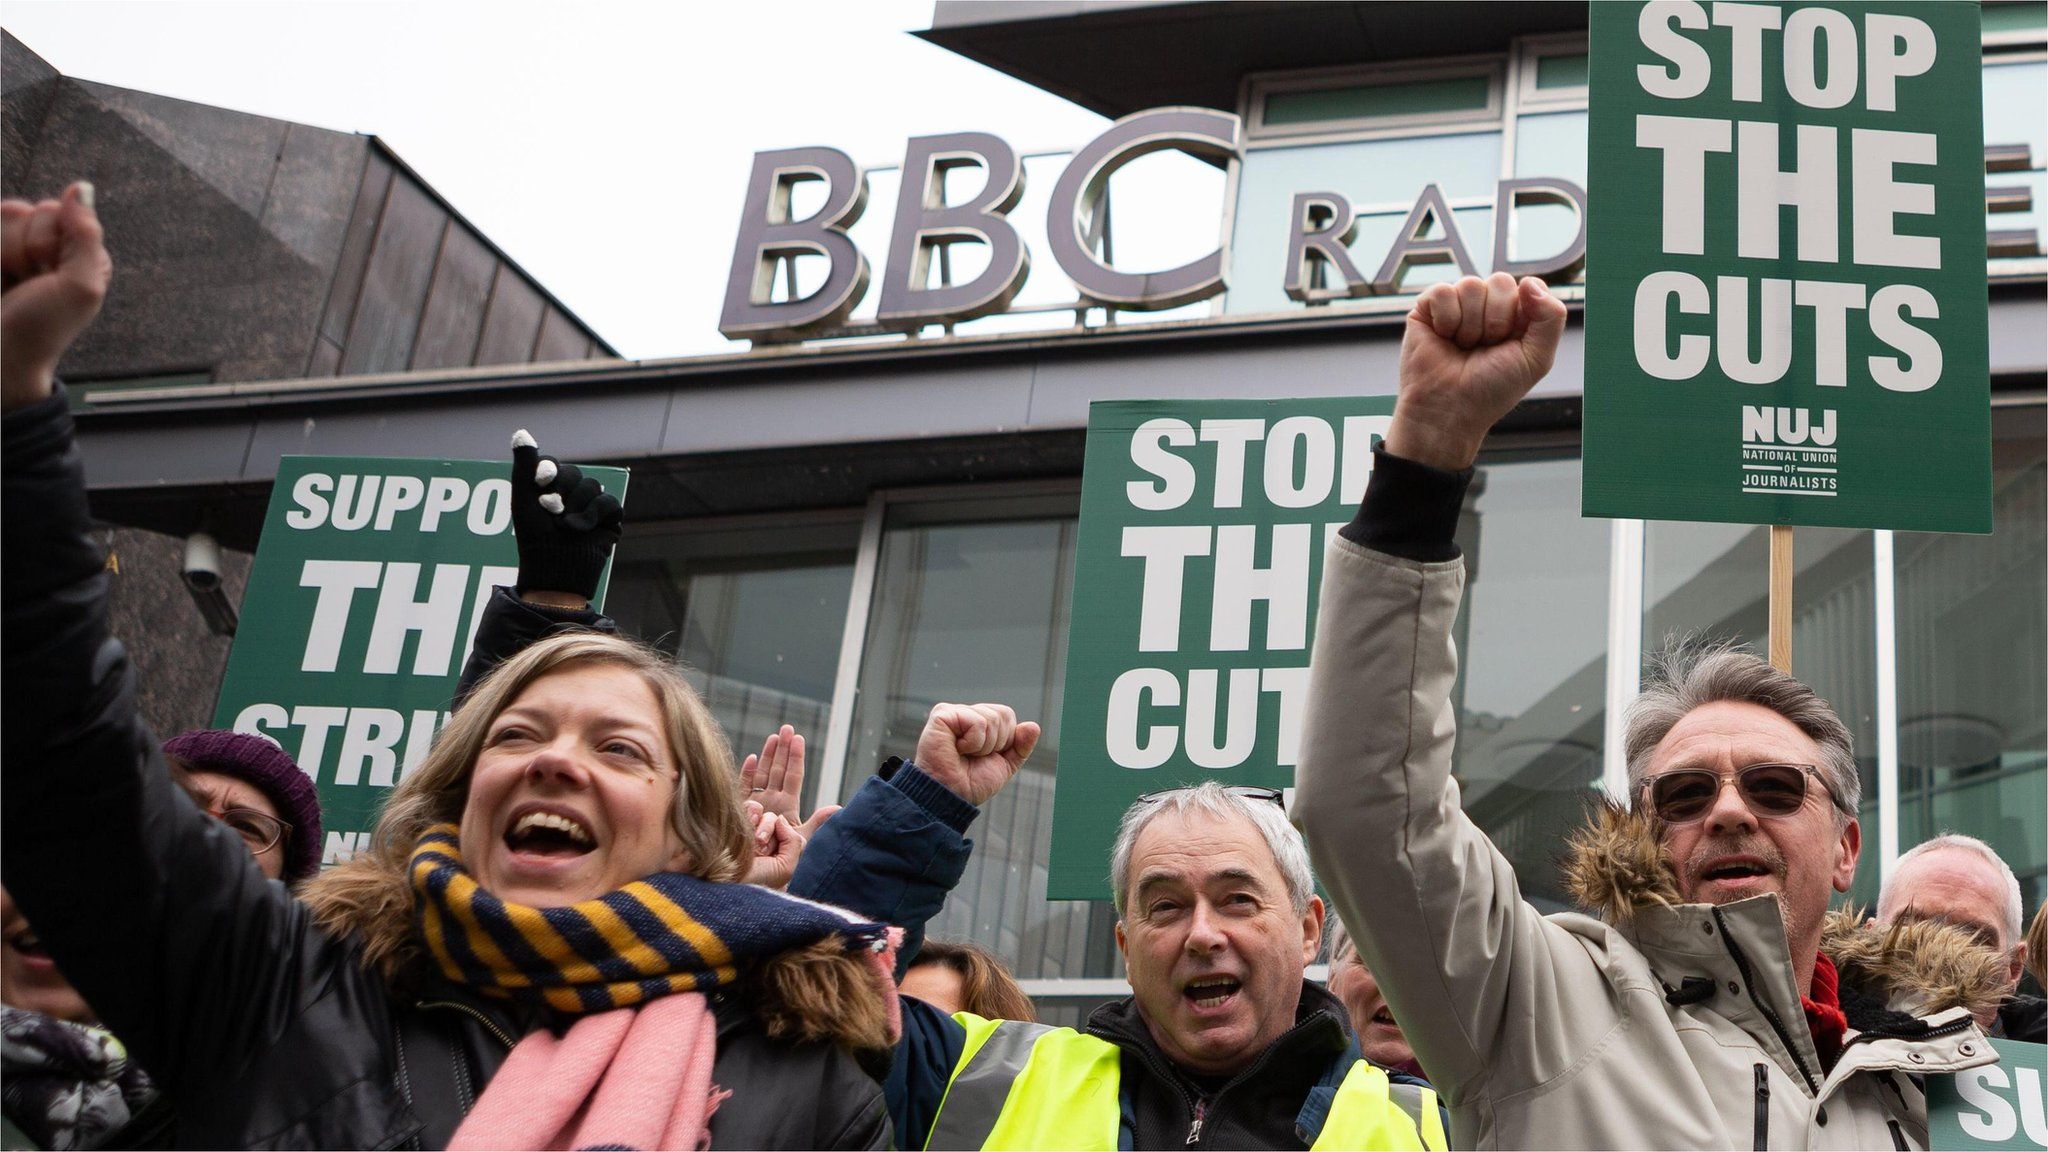 Striking BBC Local staff picket outside BBC Radio Merseyside in Liverpool, Britain, 15 March 2023. BBC Local workers in the National Union of Journalists (NUJ) have timed their strike to affect coverage of the Chancellor's Spring Budget in a row over reductions of local radio services and plans for stations to share programming on weekdays.